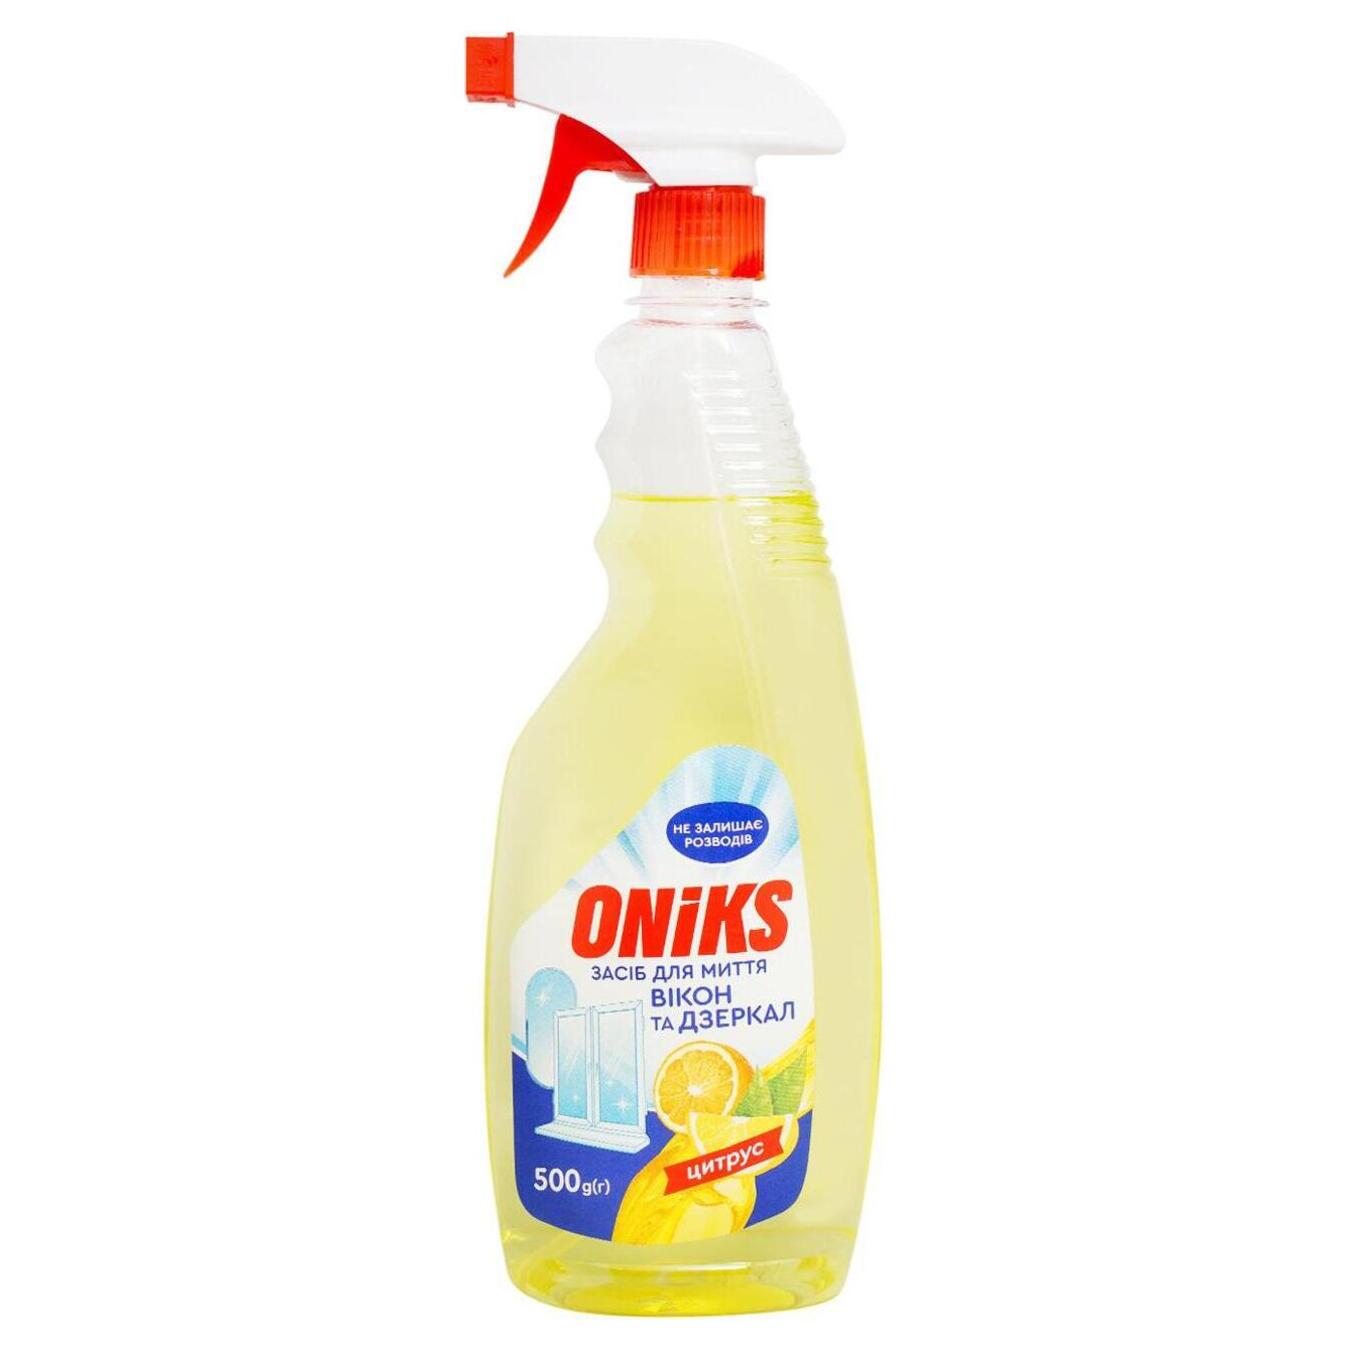 Spray for washing Oniks windows and mirrors citrus trigger 500 ml